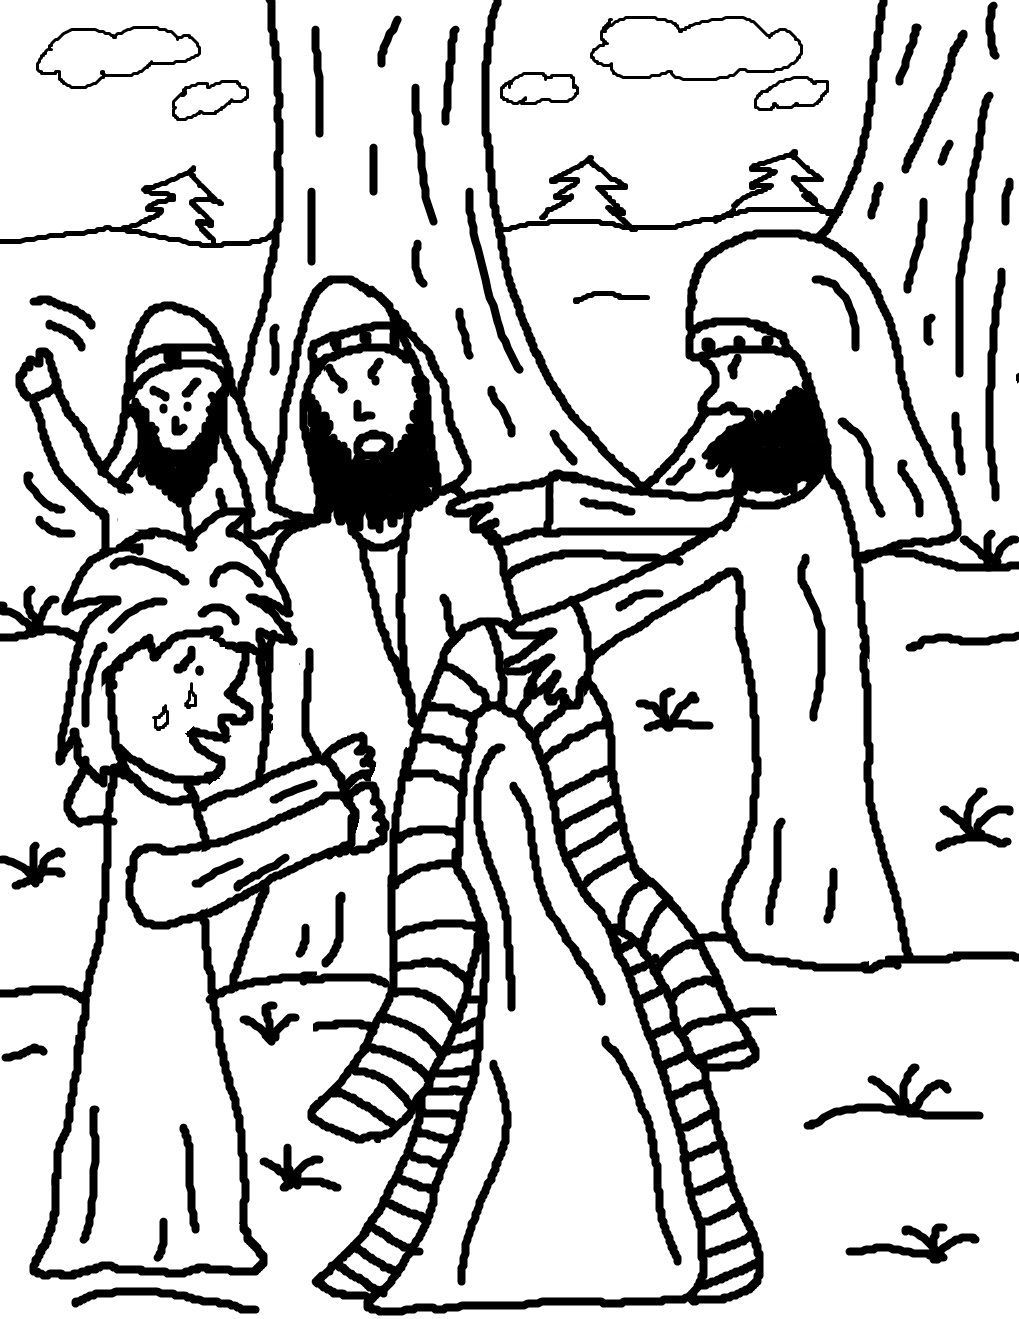 Download Josephs Coat of many colors Coloring Pages